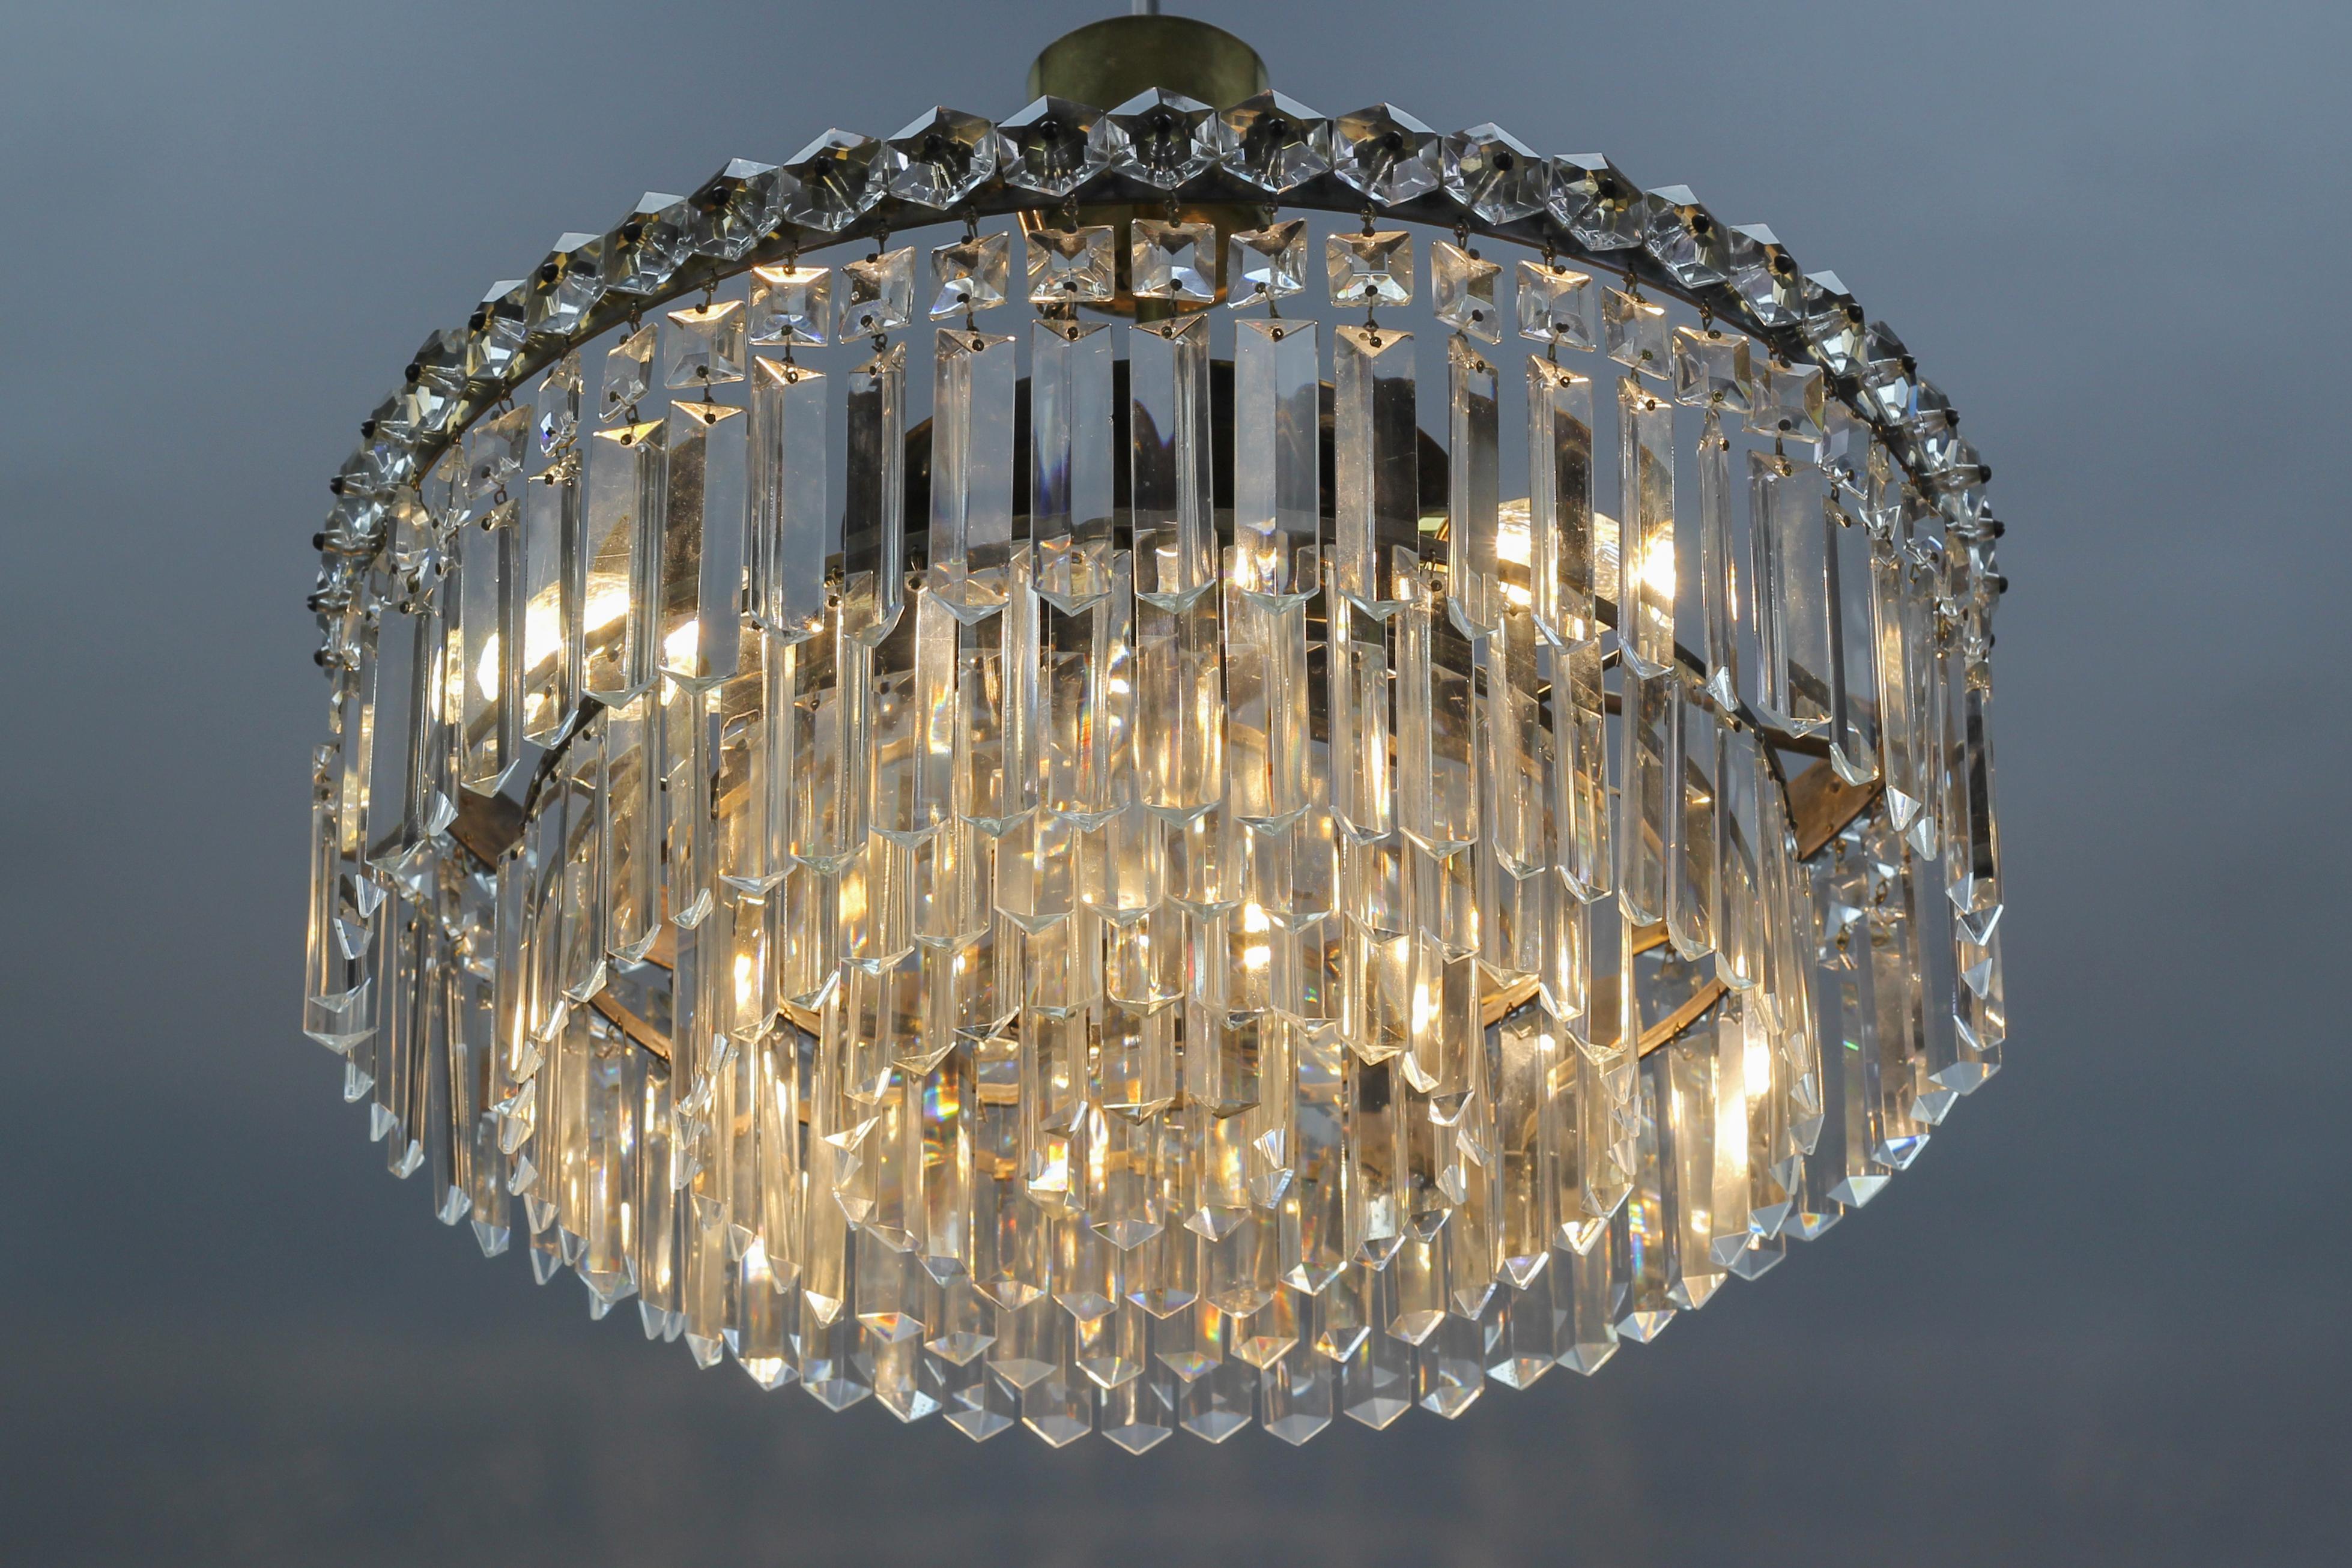 Art Deco style five-tiered three-light crystal glass and brass chandelier from circa 1950s.
This beautiful Art Deco style chandelier in a classic wedding cake form creates with its five cascading layers of crystal glass prisms a sparkling waterfall